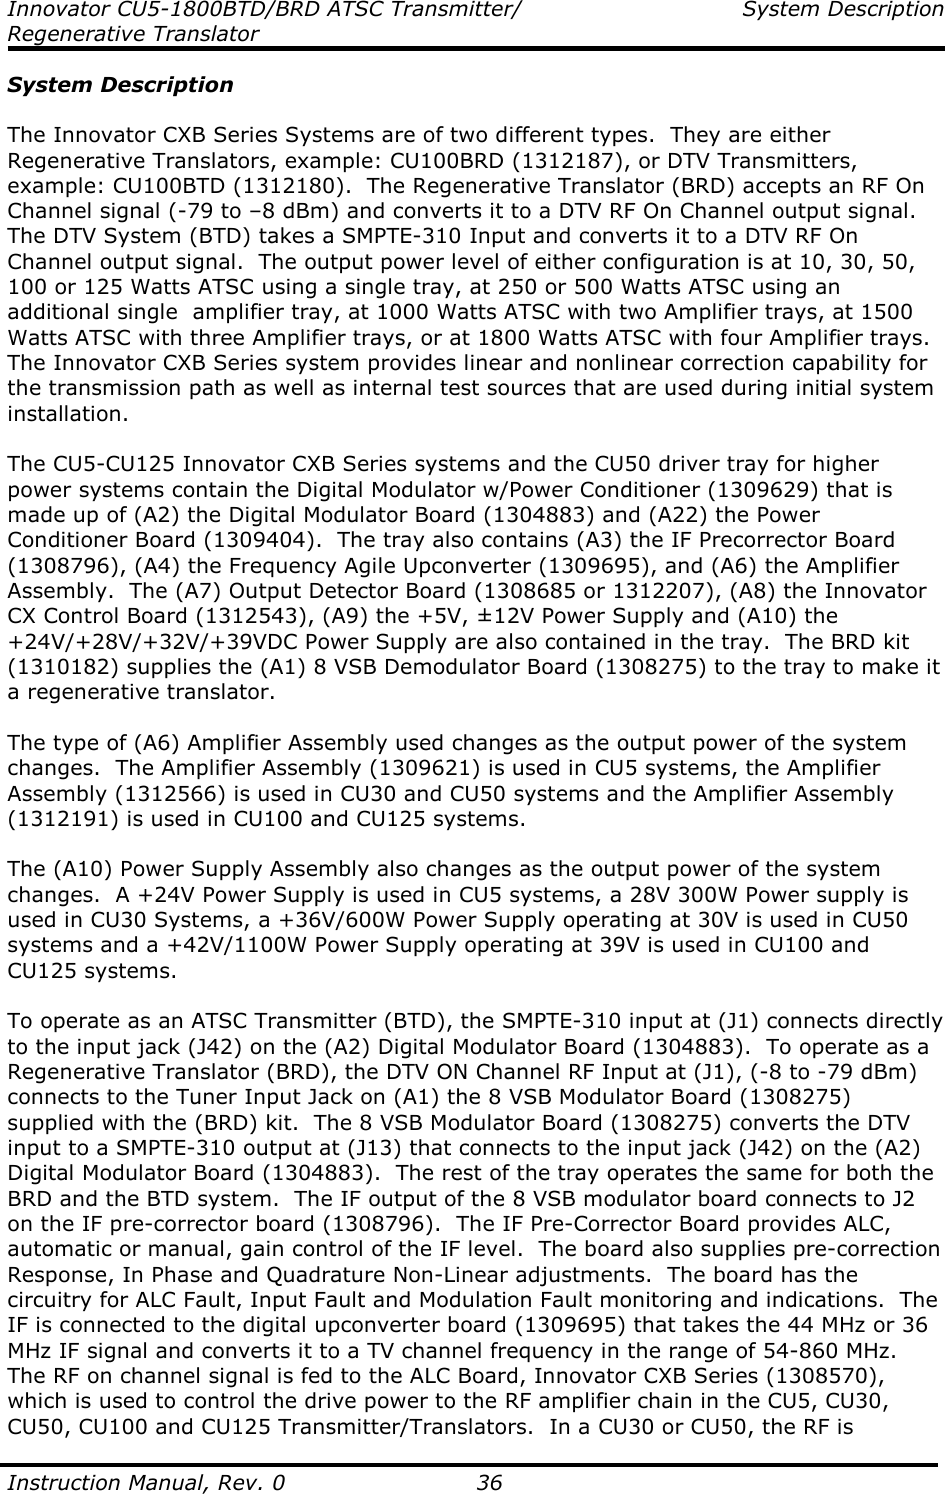 Innovator CU5-1800BTD/BRD ATSC Transmitter/  System Description Regenerative Translator  Instruction Manual, Rev. 0    36 System Description  The Innovator CXB Series Systems are of two different types.  They are either Regenerative Translators, example: CU100BRD (1312187), or DTV Transmitters, example: CU100BTD (1312180).  The Regenerative Translator (BRD) accepts an RF On Channel signal (-79 to –8 dBm) and converts it to a DTV RF On Channel output signal.  The DTV System (BTD) takes a SMPTE-310 Input and converts it to a DTV RF On Channel output signal.  The output power level of either configuration is at 10, 30, 50, 100 or 125 Watts ATSC using a single tray, at 250 or 500 Watts ATSC using an additional single  amplifier tray, at 1000 Watts ATSC with two Amplifier trays, at 1500 Watts ATSC with three Amplifier trays, or at 1800 Watts ATSC with four Amplifier trays.  The Innovator CXB Series system provides linear and nonlinear correction capability for the transmission path as well as internal test sources that are used during initial system installation.  The CU5-CU125 Innovator CXB Series systems and the CU50 driver tray for higher power systems contain the Digital Modulator w/Power Conditioner (1309629) that is made up of (A2) the Digital Modulator Board (1304883) and (A22) the Power Conditioner Board (1309404).  The tray also contains (A3) the IF Precorrector Board (1308796), (A4) the Frequency Agile Upconverter (1309695), and (A6) the Amplifier Assembly.  The (A7) Output Detector Board (1308685 or 1312207), (A8) the Innovator CX Control Board (1312543), (A9) the +5V, ±12V Power Supply and (A10) the +24V/+28V/+32V/+39VDC Power Supply are also contained in the tray.  The BRD kit (1310182) supplies the (A1) 8 VSB Demodulator Board (1308275) to the tray to make it a regenerative translator.  The type of (A6) Amplifier Assembly used changes as the output power of the system changes.  The Amplifier Assembly (1309621) is used in CU5 systems, the Amplifier Assembly (1312566) is used in CU30 and CU50 systems and the Amplifier Assembly (1312191) is used in CU100 and CU125 systems.  The (A10) Power Supply Assembly also changes as the output power of the system changes.  A +24V Power Supply is used in CU5 systems, a 28V 300W Power supply is used in CU30 Systems, a +36V/600W Power Supply operating at 30V is used in CU50 systems and a +42V/1100W Power Supply operating at 39V is used in CU100 and CU125 systems.  To operate as an ATSC Transmitter (BTD), the SMPTE-310 input at (J1) connects directly to the input jack (J42) on the (A2) Digital Modulator Board (1304883).  To operate as a Regenerative Translator (BRD), the DTV ON Channel RF Input at (J1), (-8 to -79 dBm) connects to the Tuner Input Jack on (A1) the 8 VSB Modulator Board (1308275) supplied with the (BRD) kit.  The 8 VSB Modulator Board (1308275) converts the DTV input to a SMPTE-310 output at (J13) that connects to the input jack (J42) on the (A2) Digital Modulator Board (1304883).  The rest of the tray operates the same for both the BRD and the BTD system.  The IF output of the 8 VSB modulator board connects to J2 on the IF pre-corrector board (1308796).  The IF Pre-Corrector Board provides ALC, automatic or manual, gain control of the IF level.  The board also supplies pre-correction Response, In Phase and Quadrature Non-Linear adjustments.  The board has the circuitry for ALC Fault, Input Fault and Modulation Fault monitoring and indications.  The IF is connected to the digital upconverter board (1309695) that takes the 44 MHz or 36 MHz IF signal and converts it to a TV channel frequency in the range of 54-860 MHz.  The RF on channel signal is fed to the ALC Board, Innovator CXB Series (1308570), which is used to control the drive power to the RF amplifier chain in the CU5, CU30, CU50, CU100 and CU125 Transmitter/Translators.  In a CU30 or CU50, the RF is 